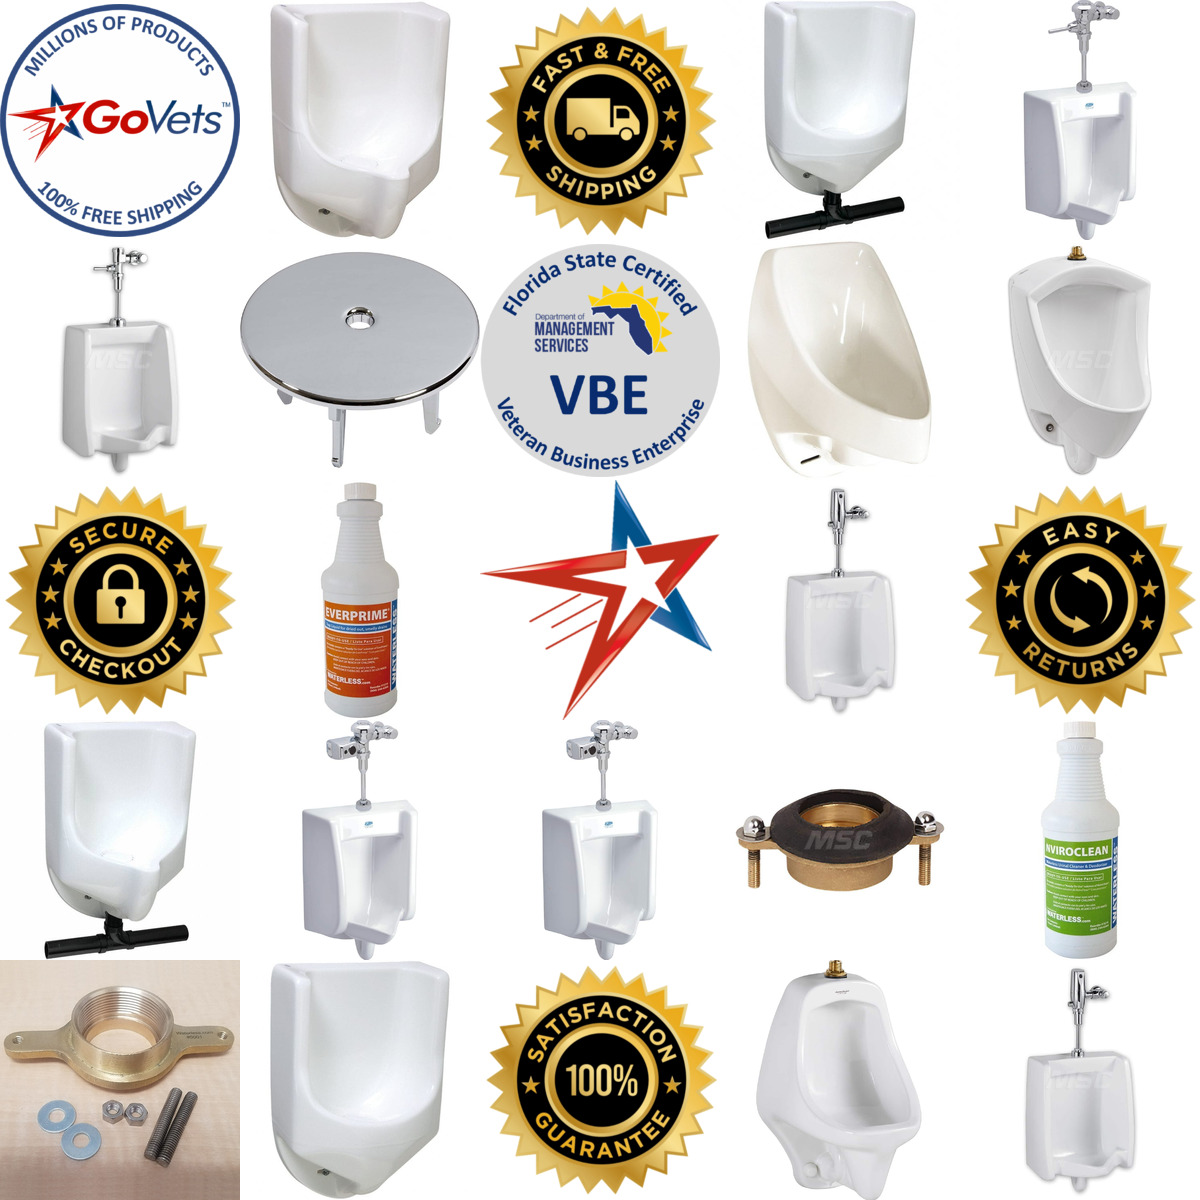 A selection of Urinals and Accessories products on GoVets